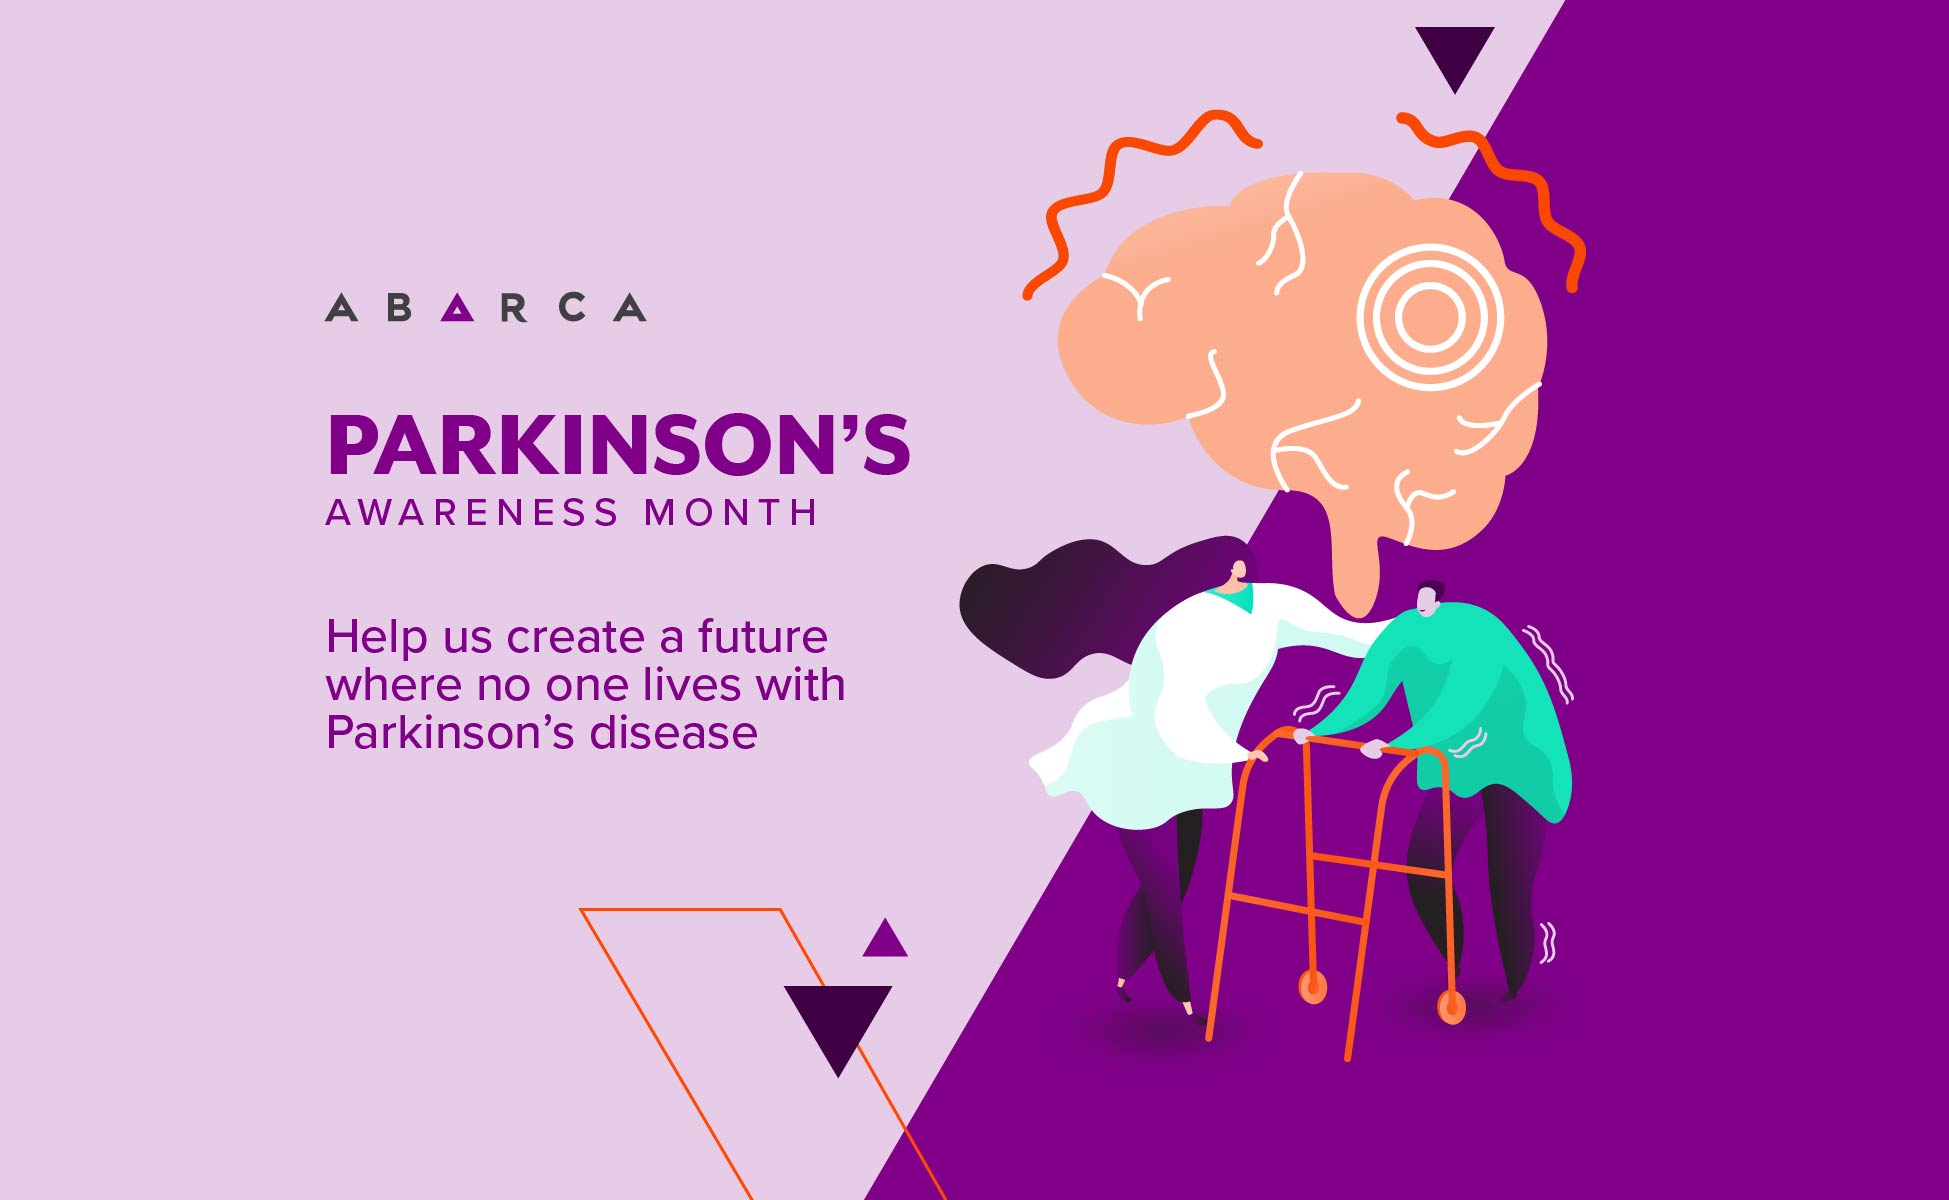 Join Abarca in bringing awareness to Parkinson's disease this April